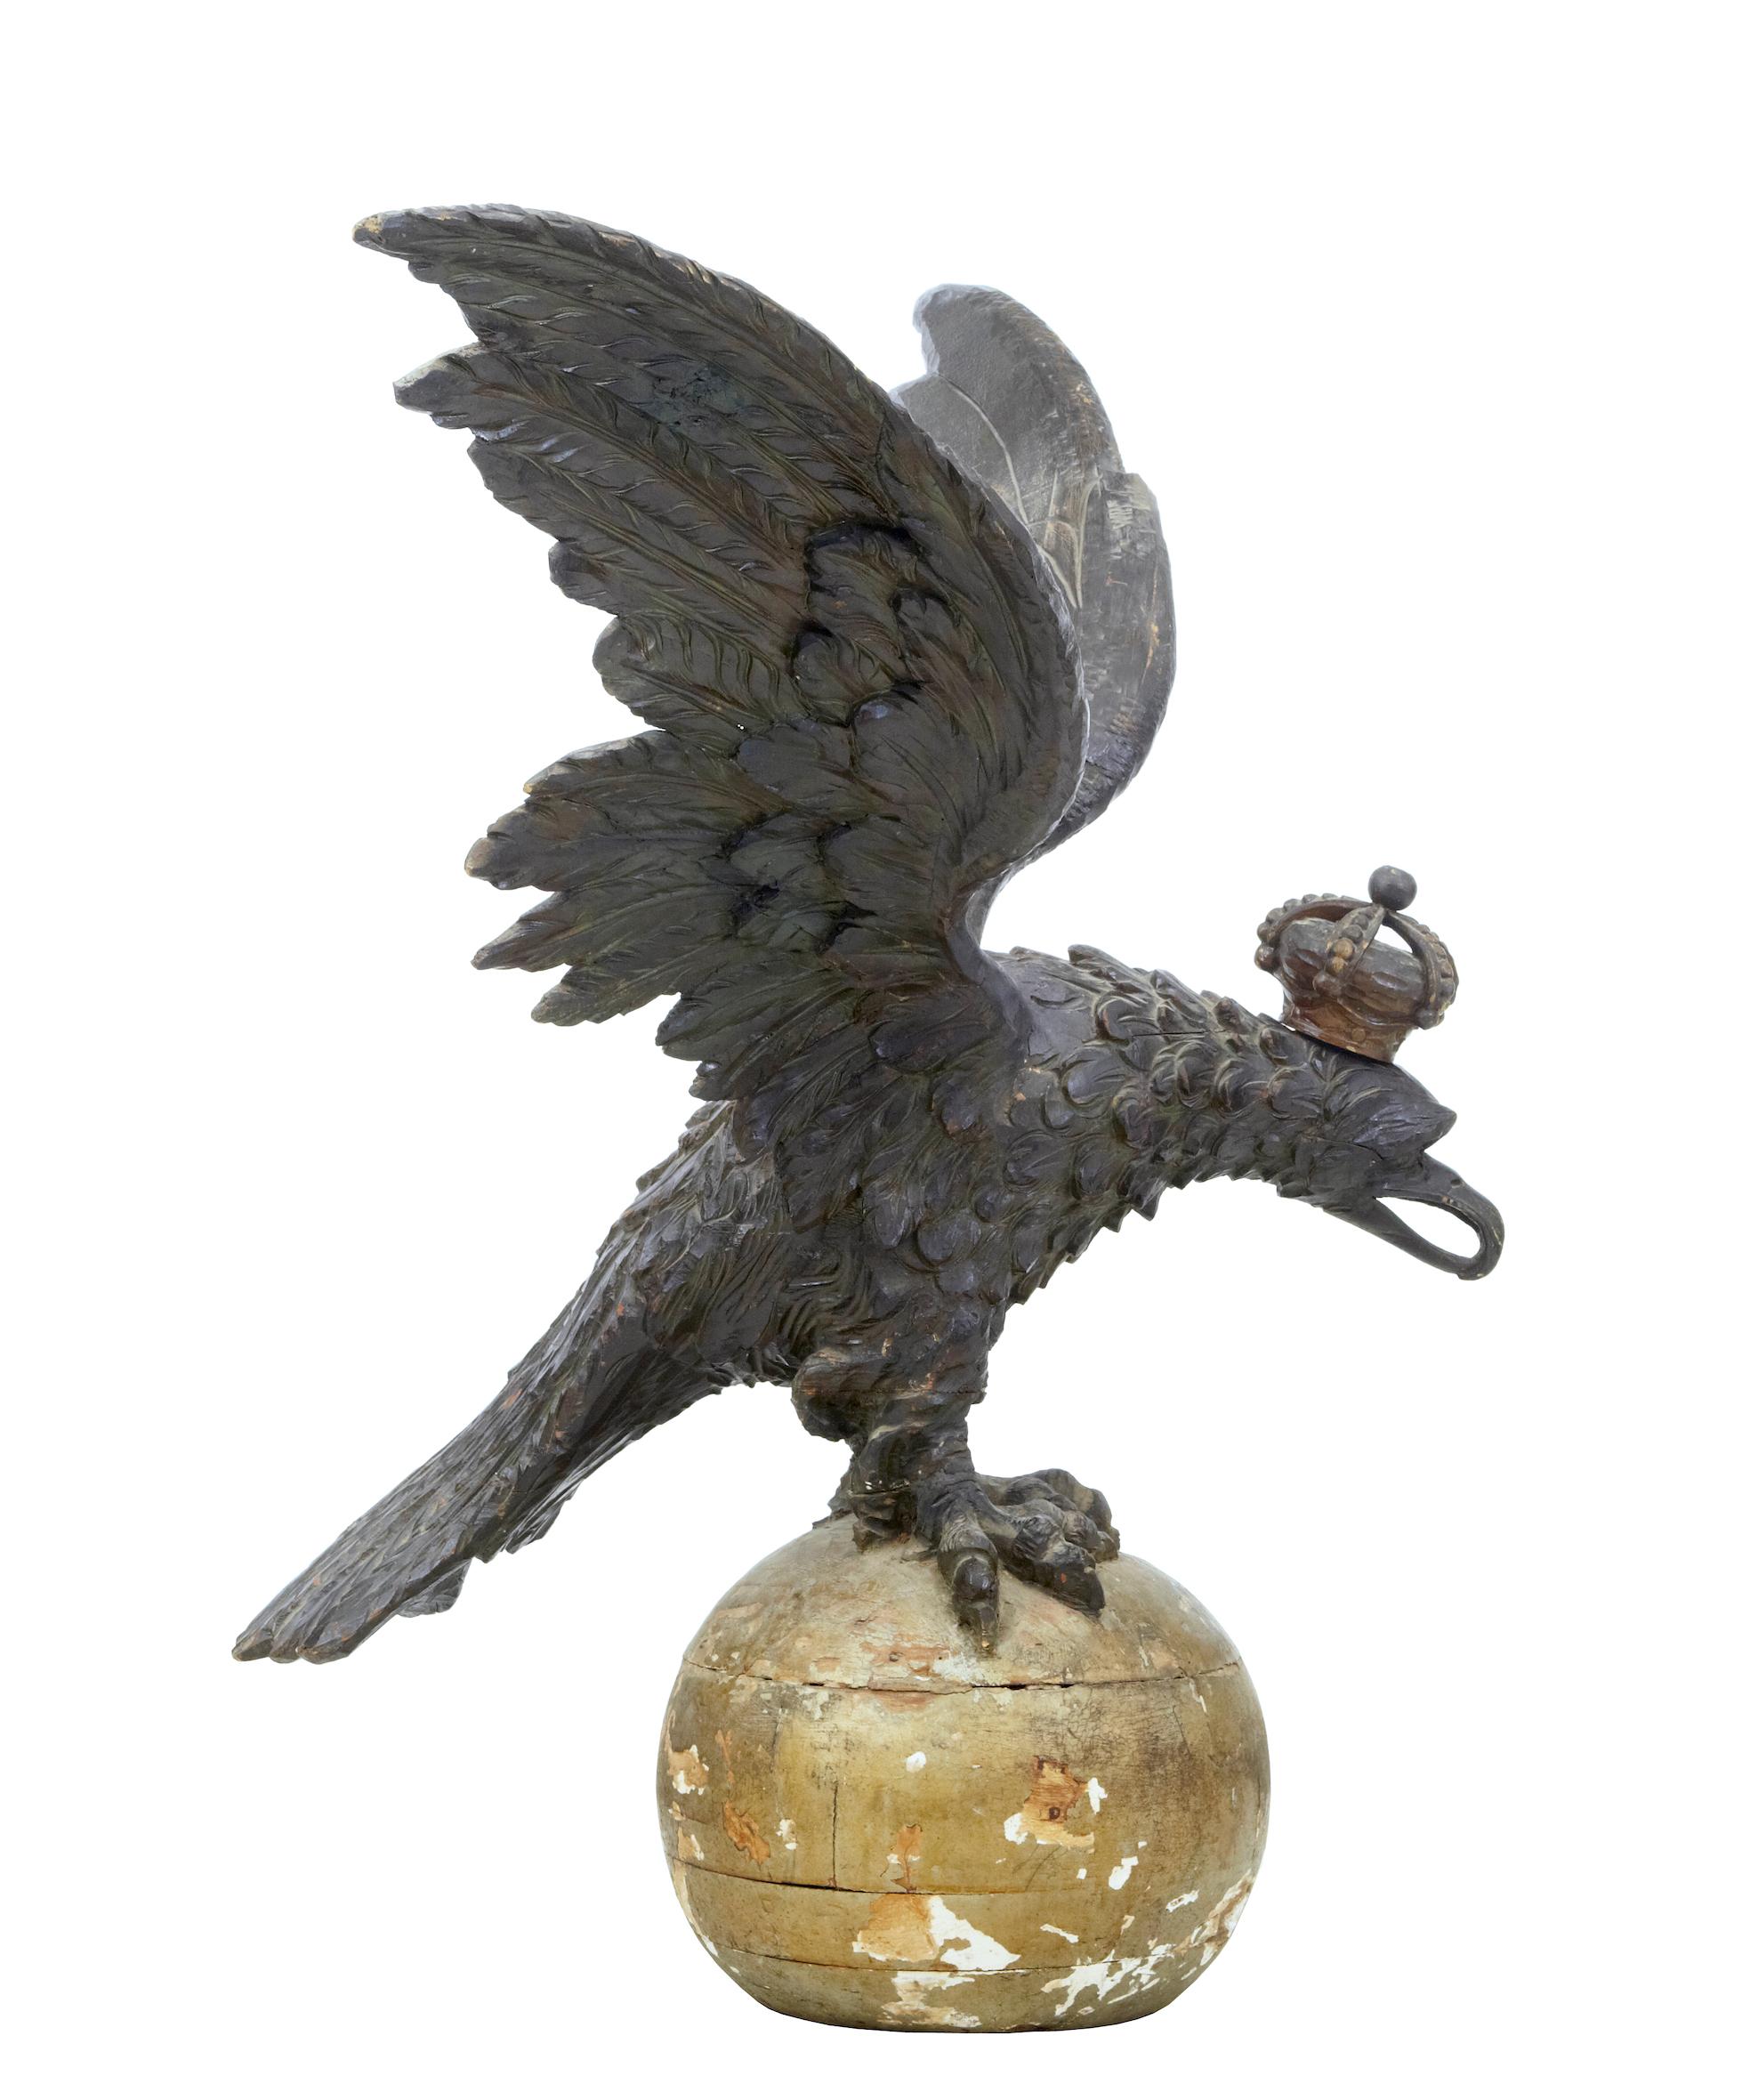 German Rare Early 19th Century Carved Hapsburg Decorative Eagle